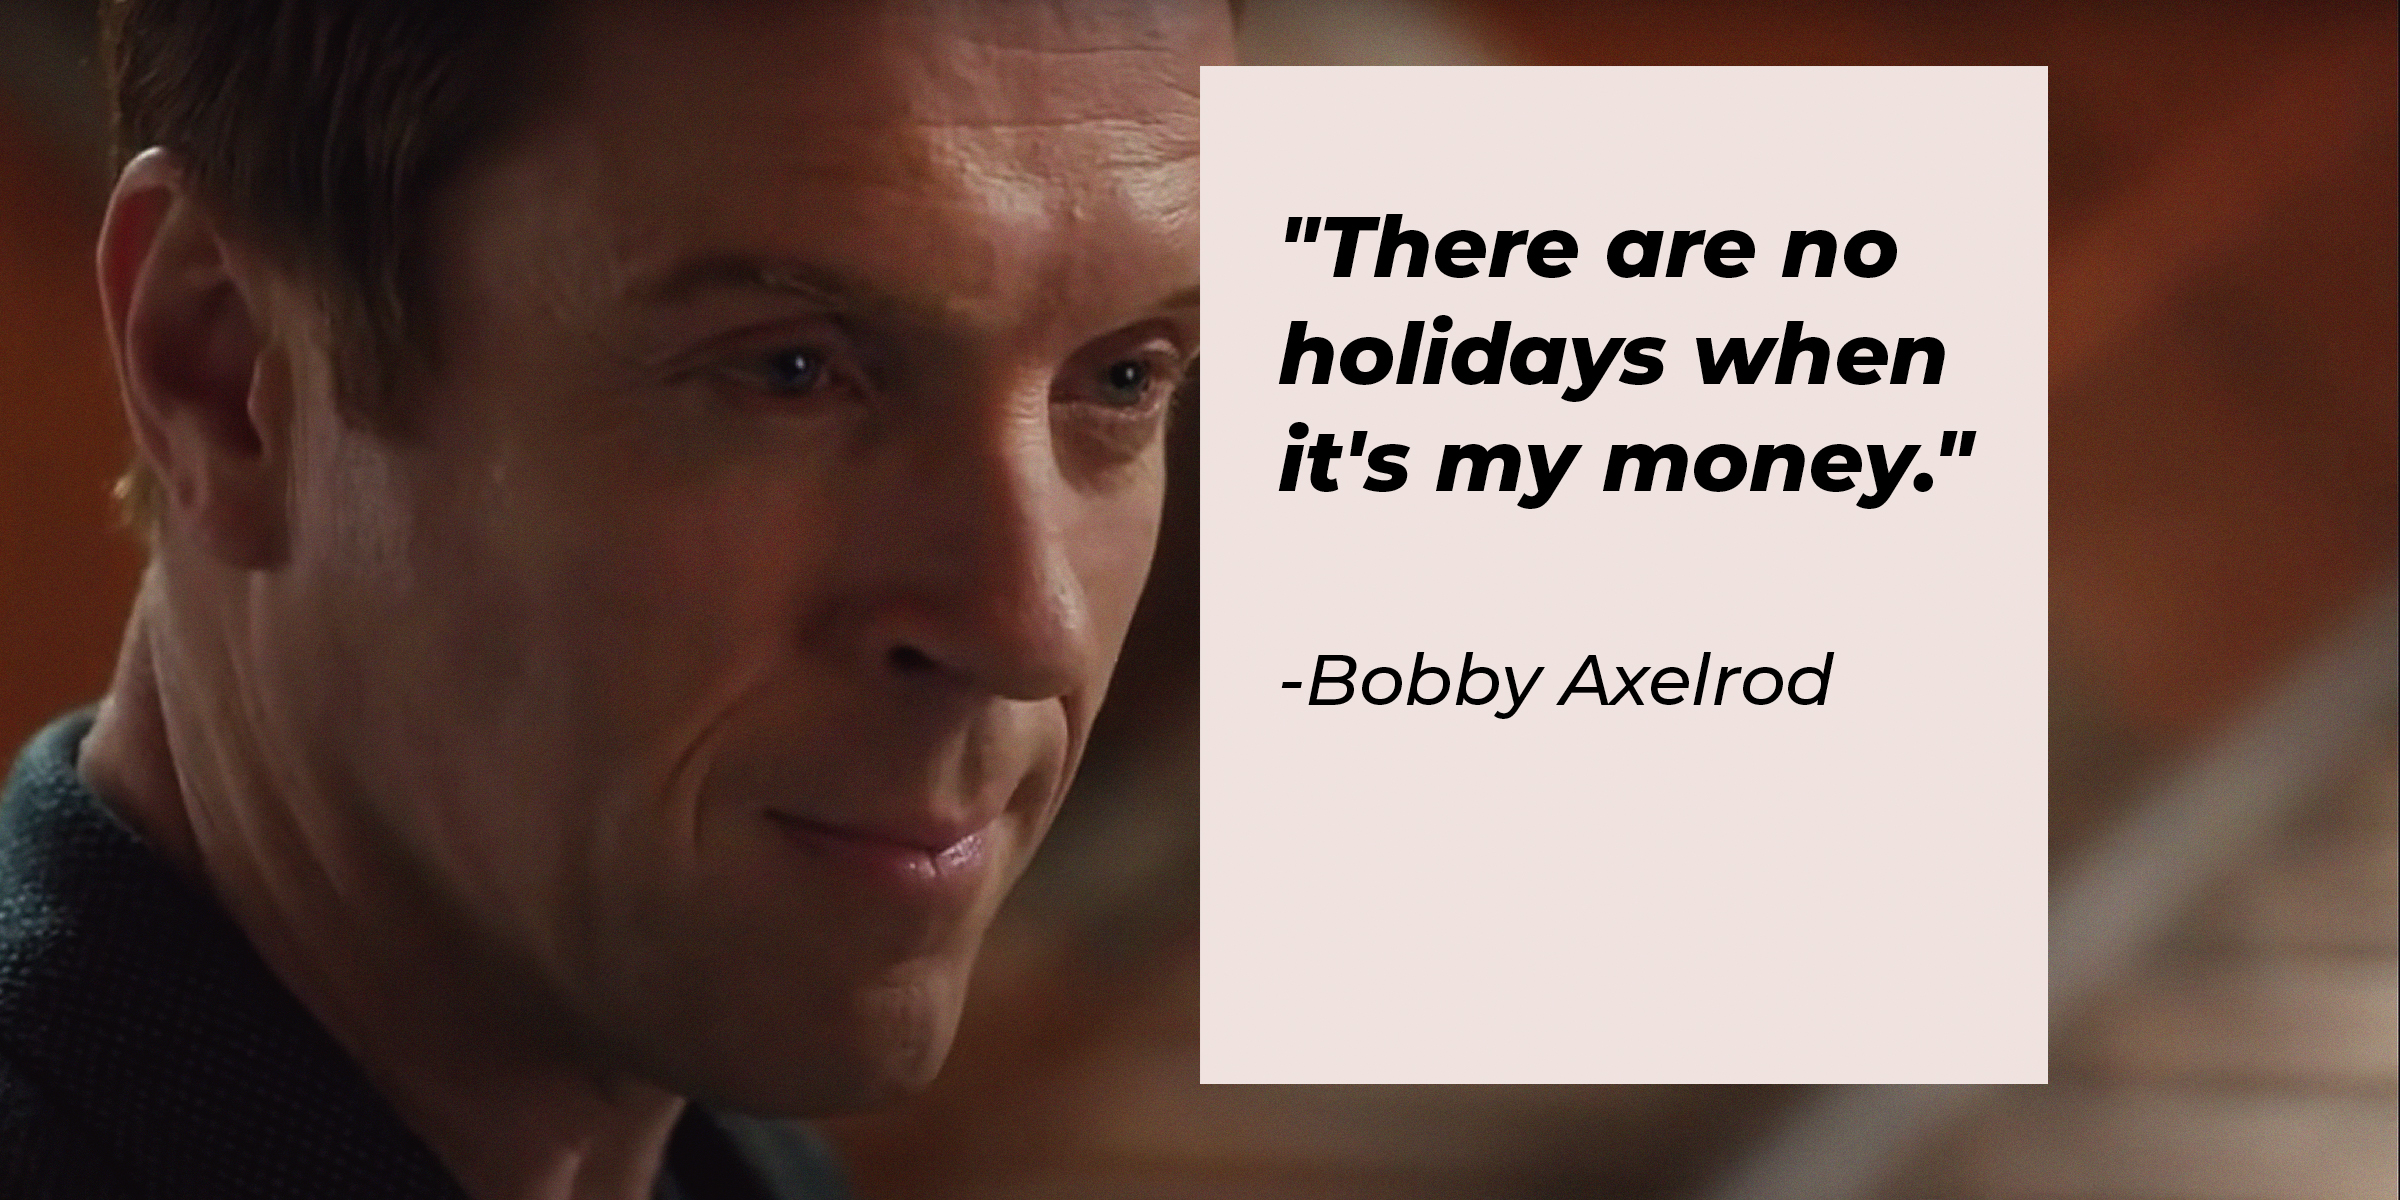 Photo of Bobby Axelrod with the quote: "There are no holidays when it's my money." | Source: Youtube.com/BillionsOnShowtime